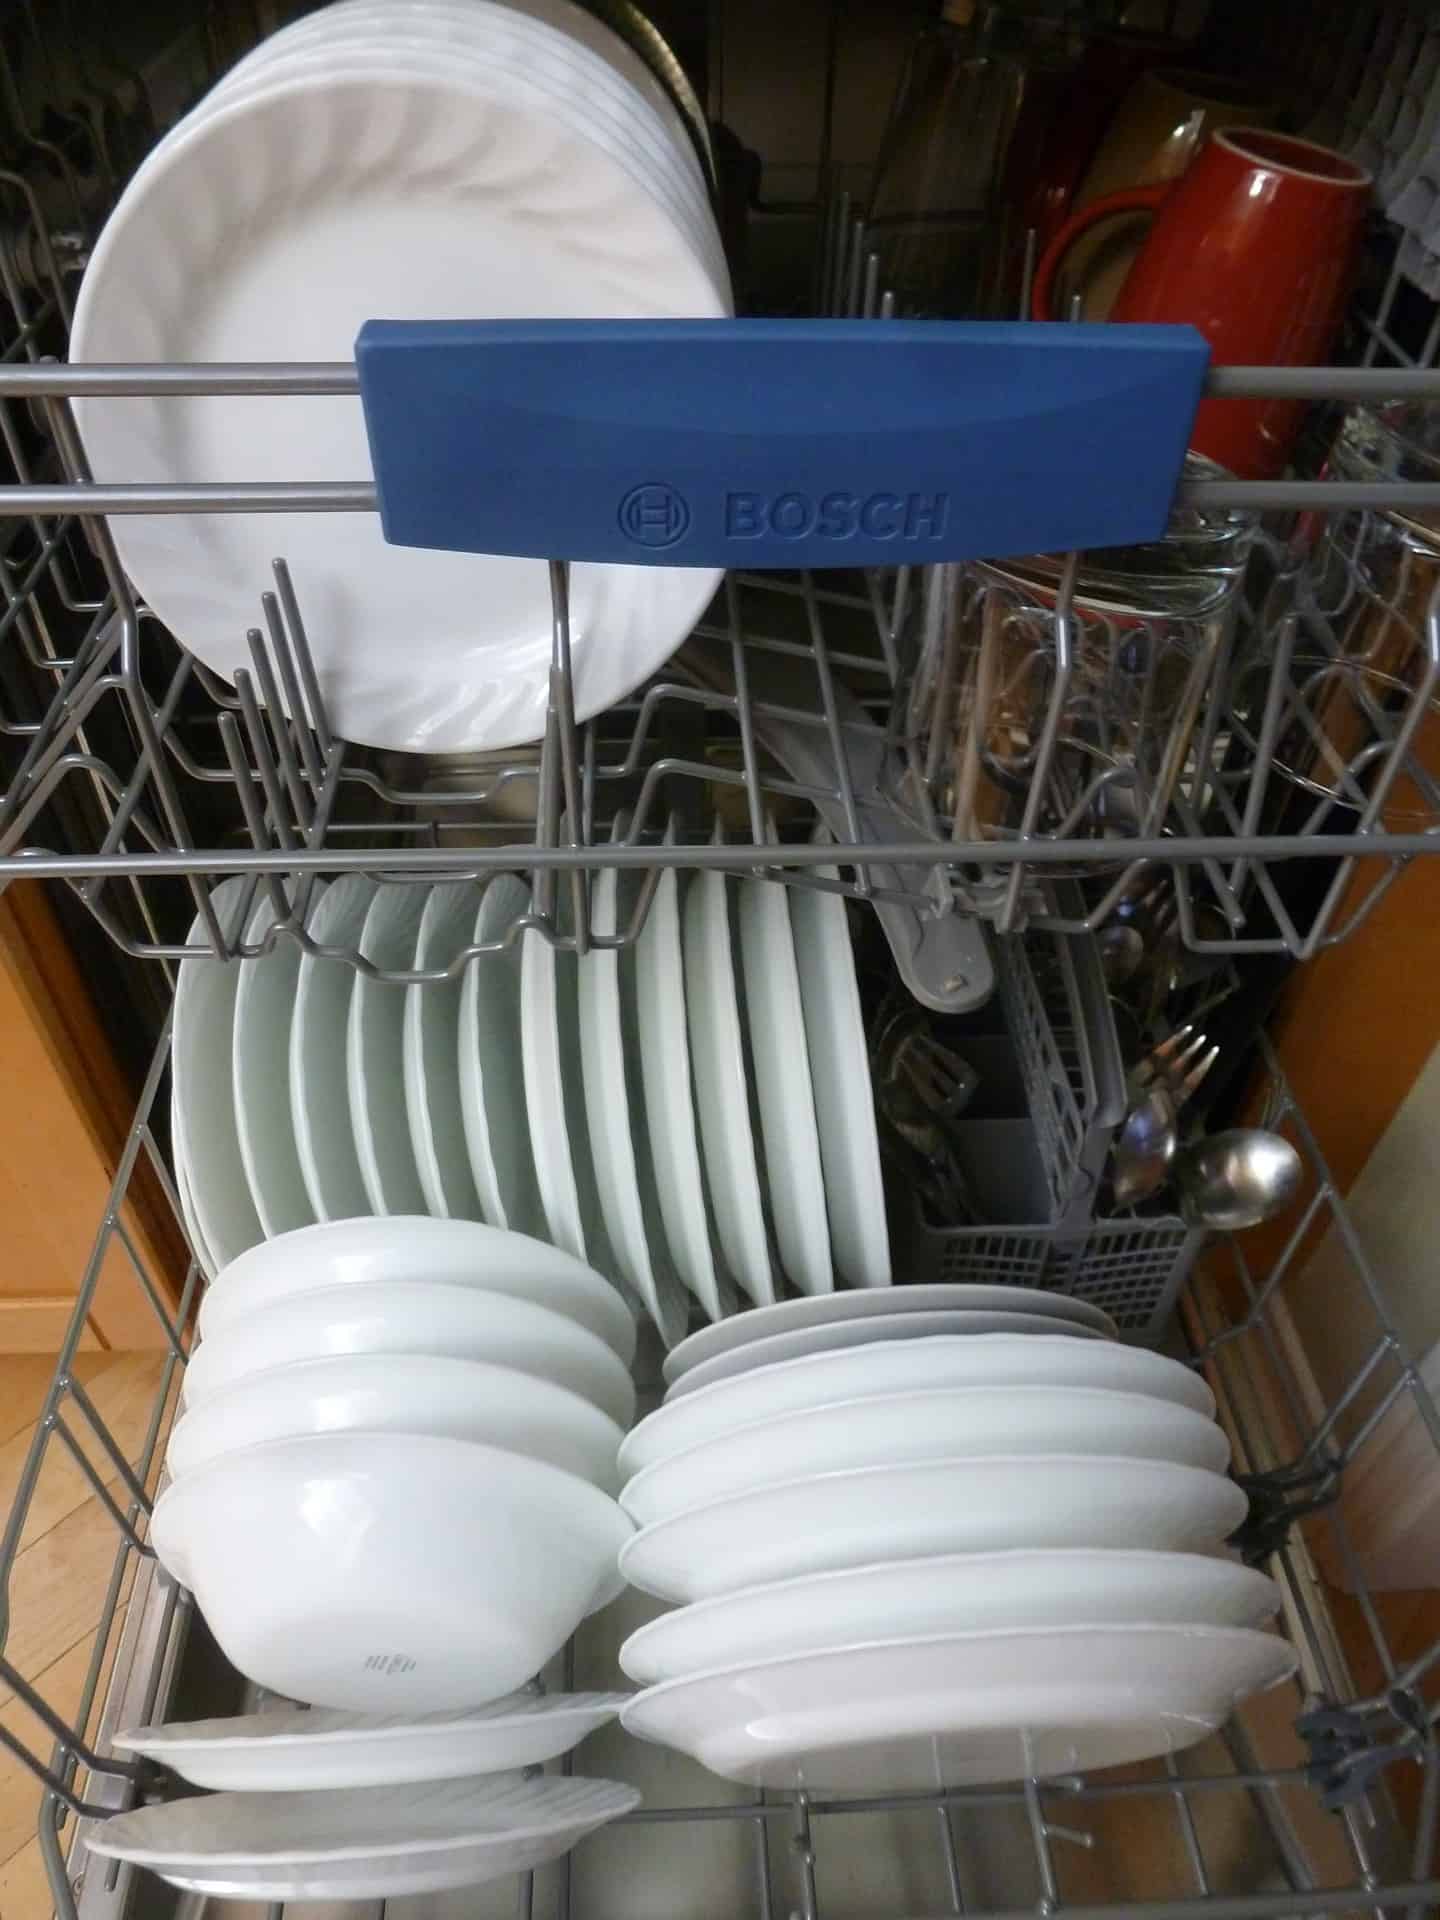 Let Your Dishes in the Dishwasher Air Dry